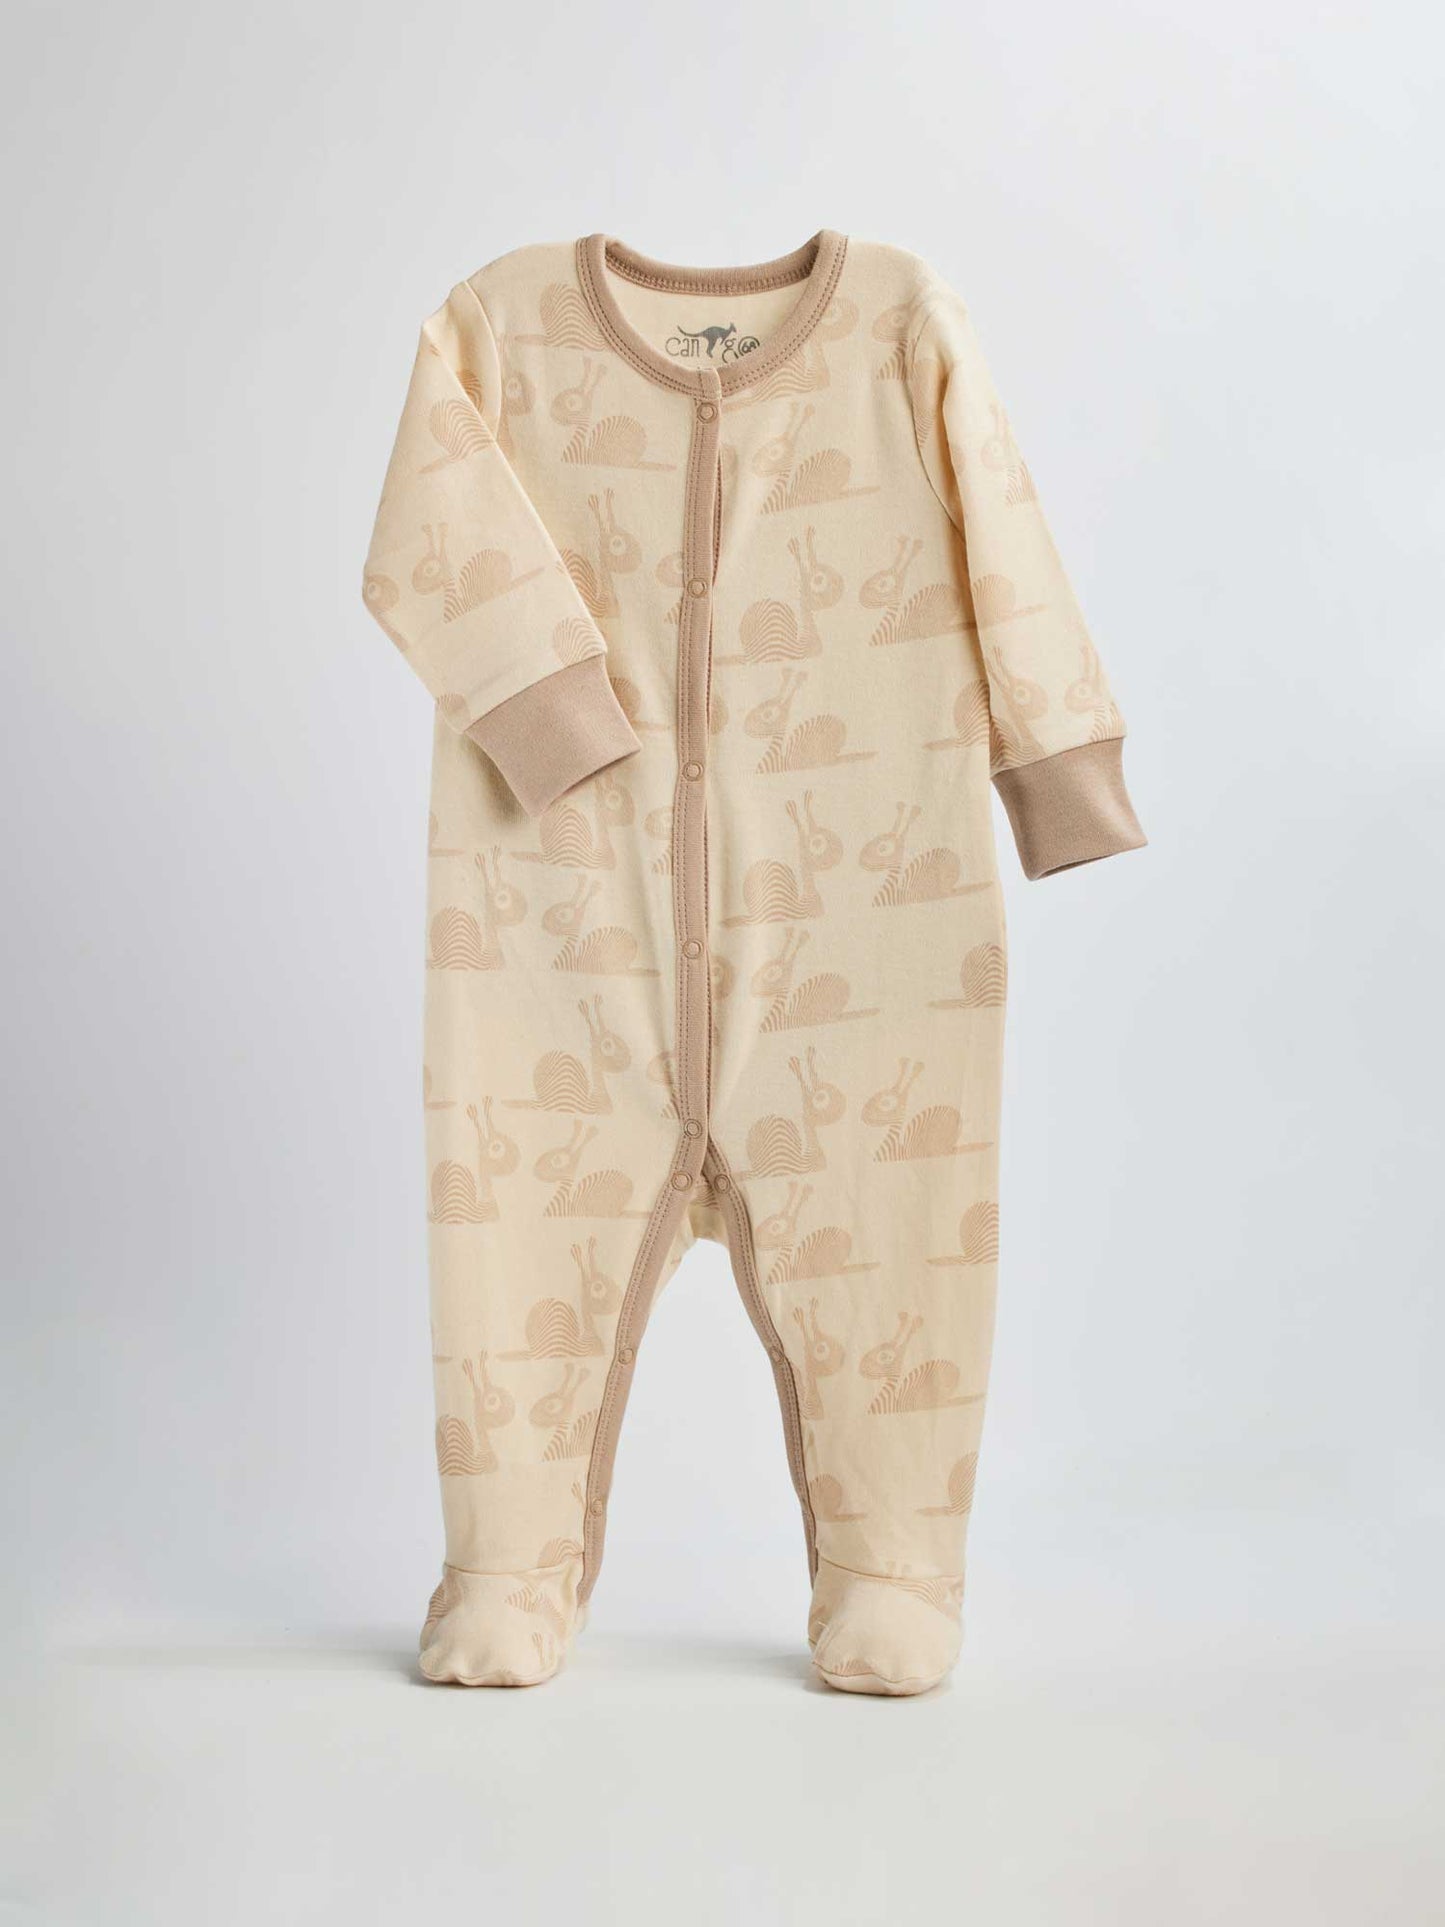 Infant overall Snails 282 is a warm and cozy baby overall that your little one will addore